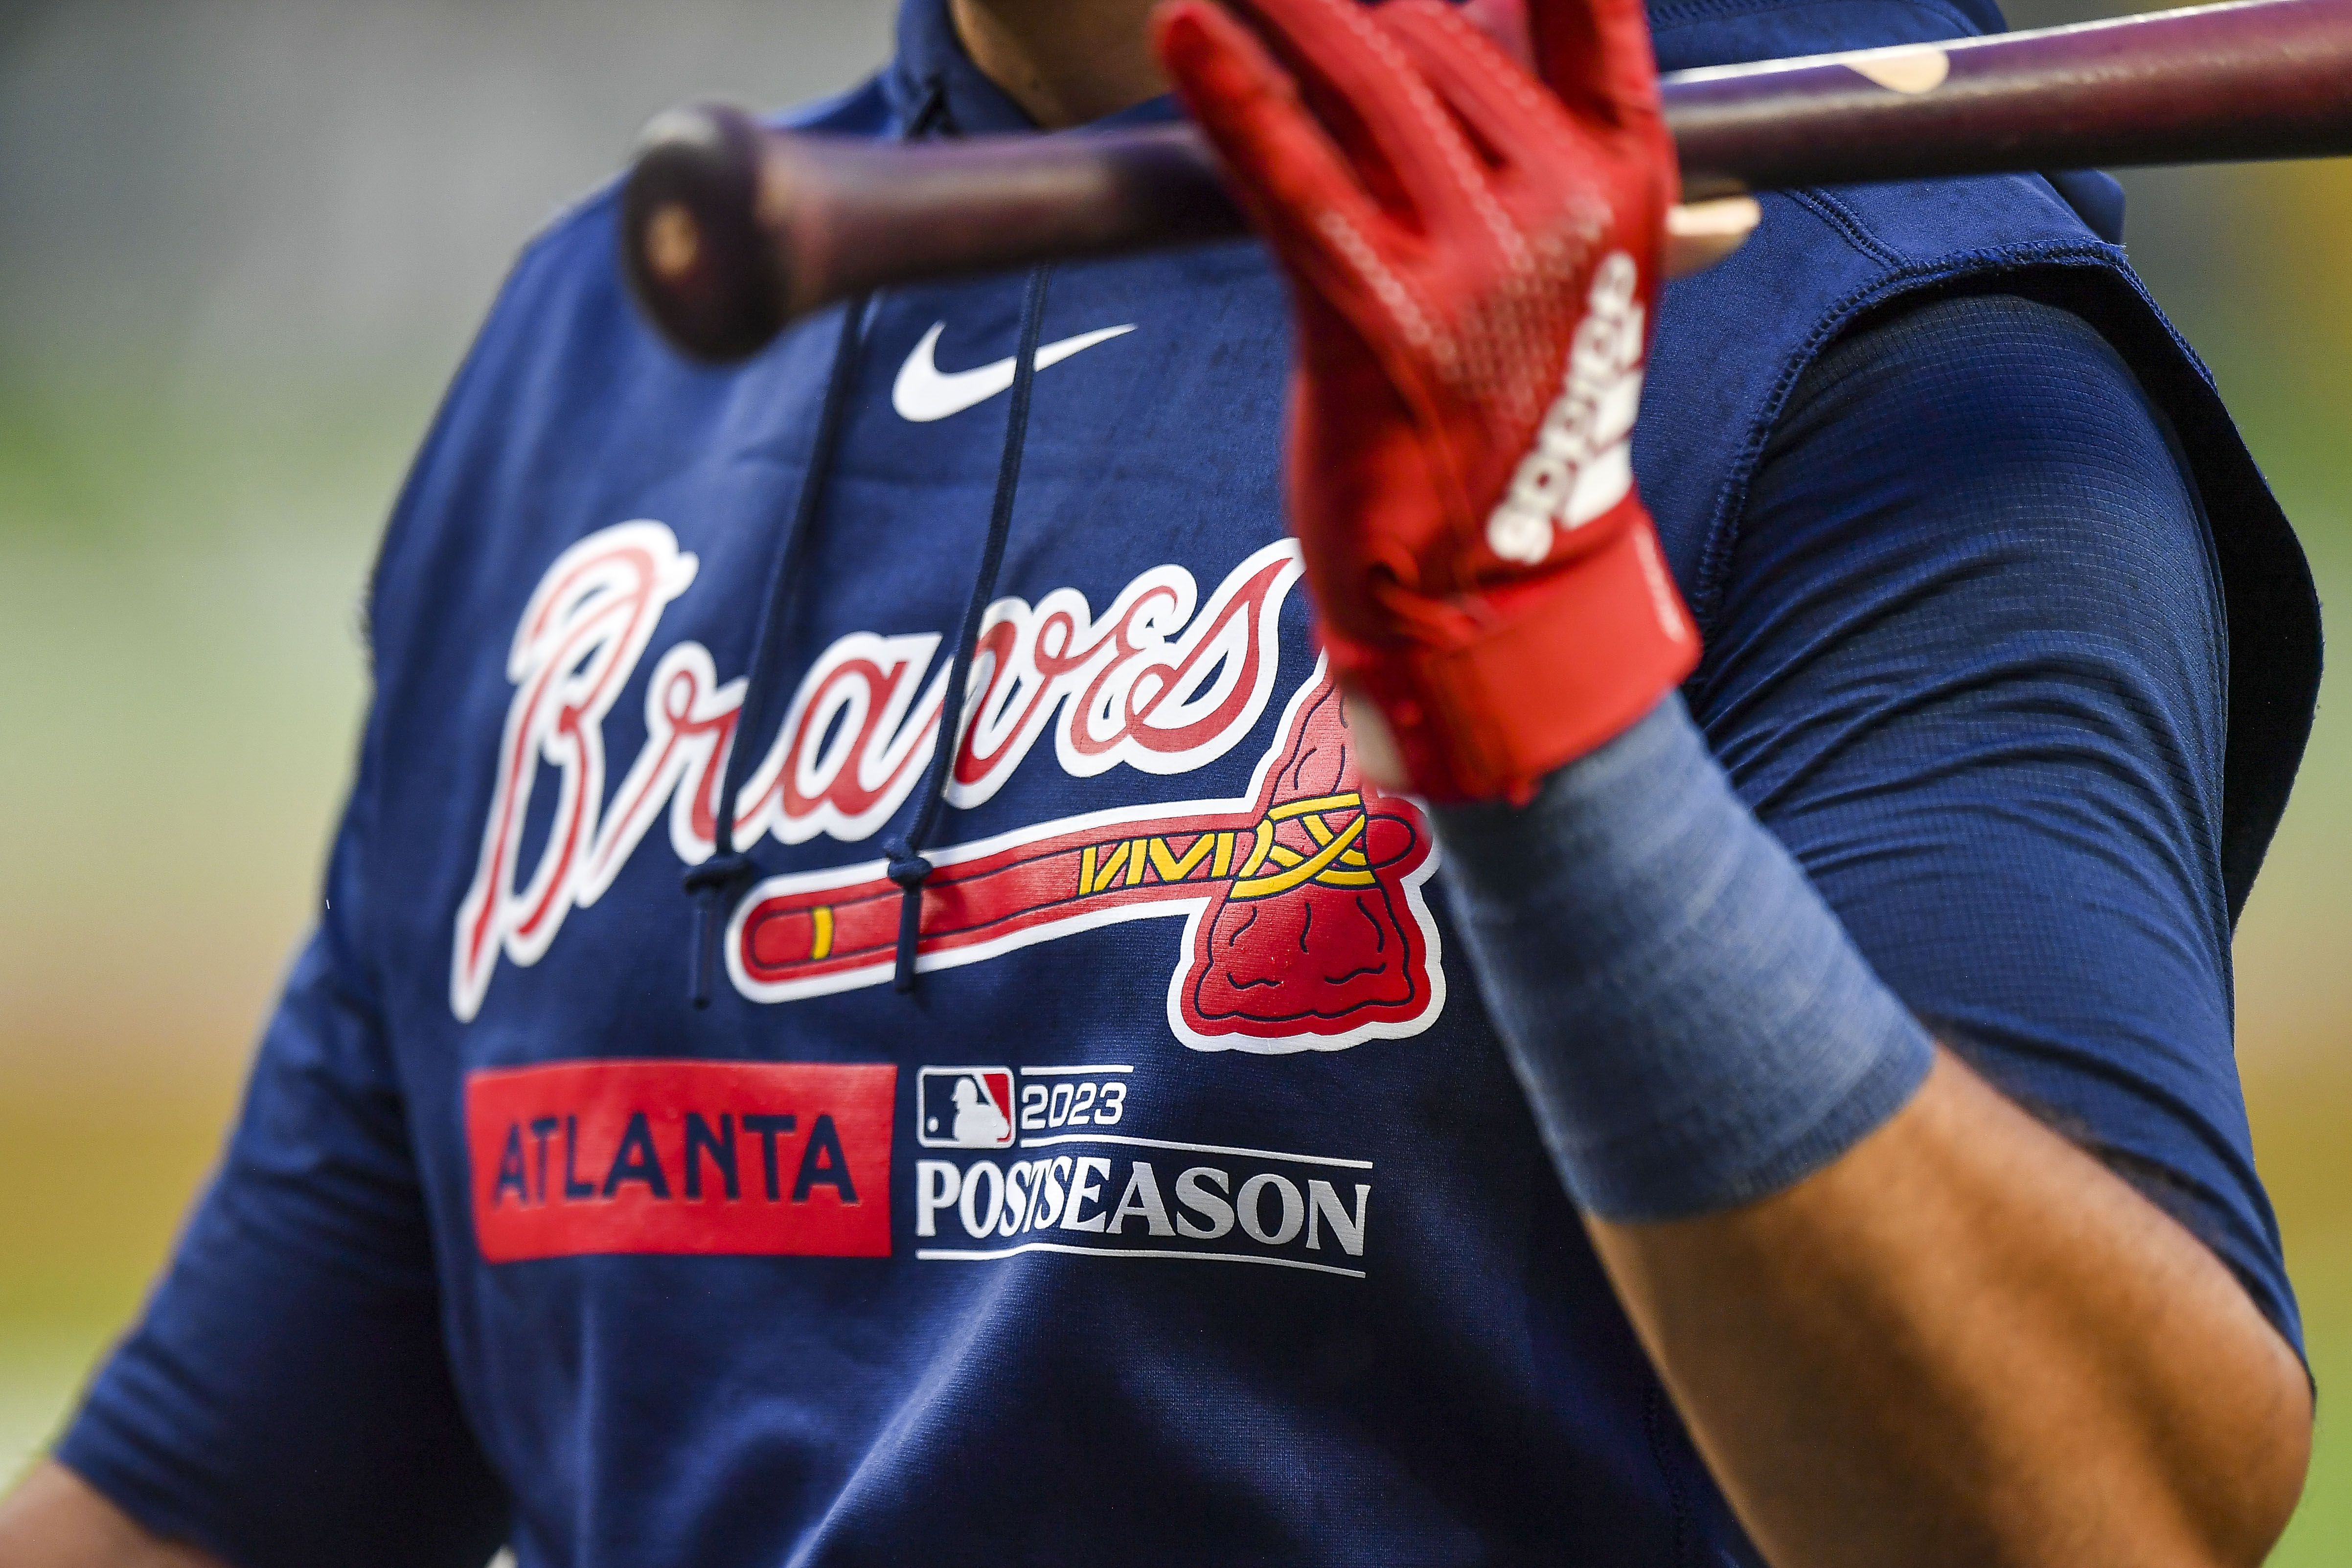 Get ready for the MLB Postseason with some Atlanta Braves gear